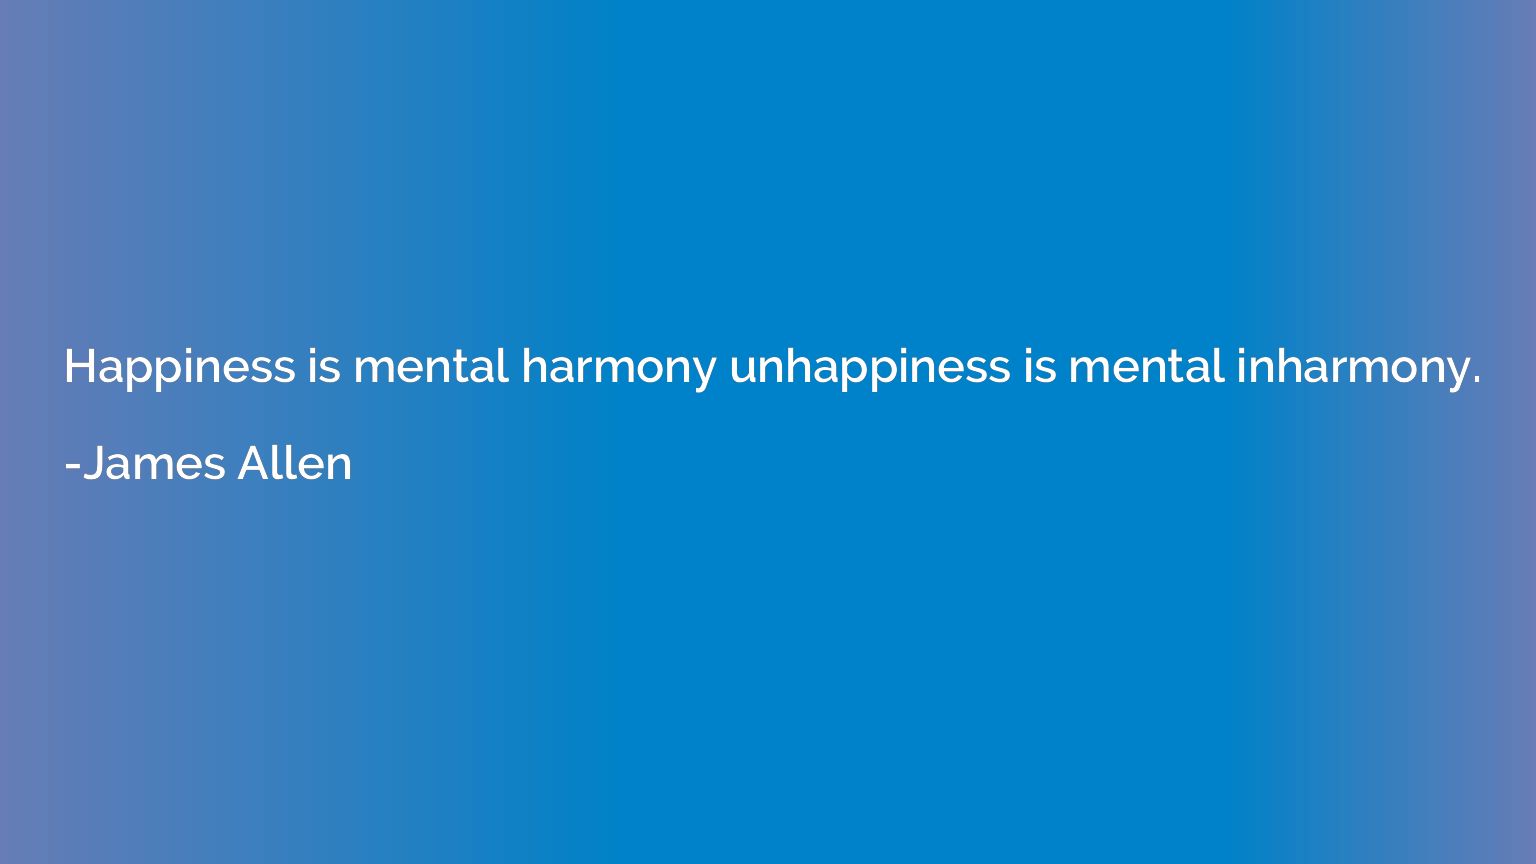 Happiness is mental harmony unhappiness is mental inharmony.